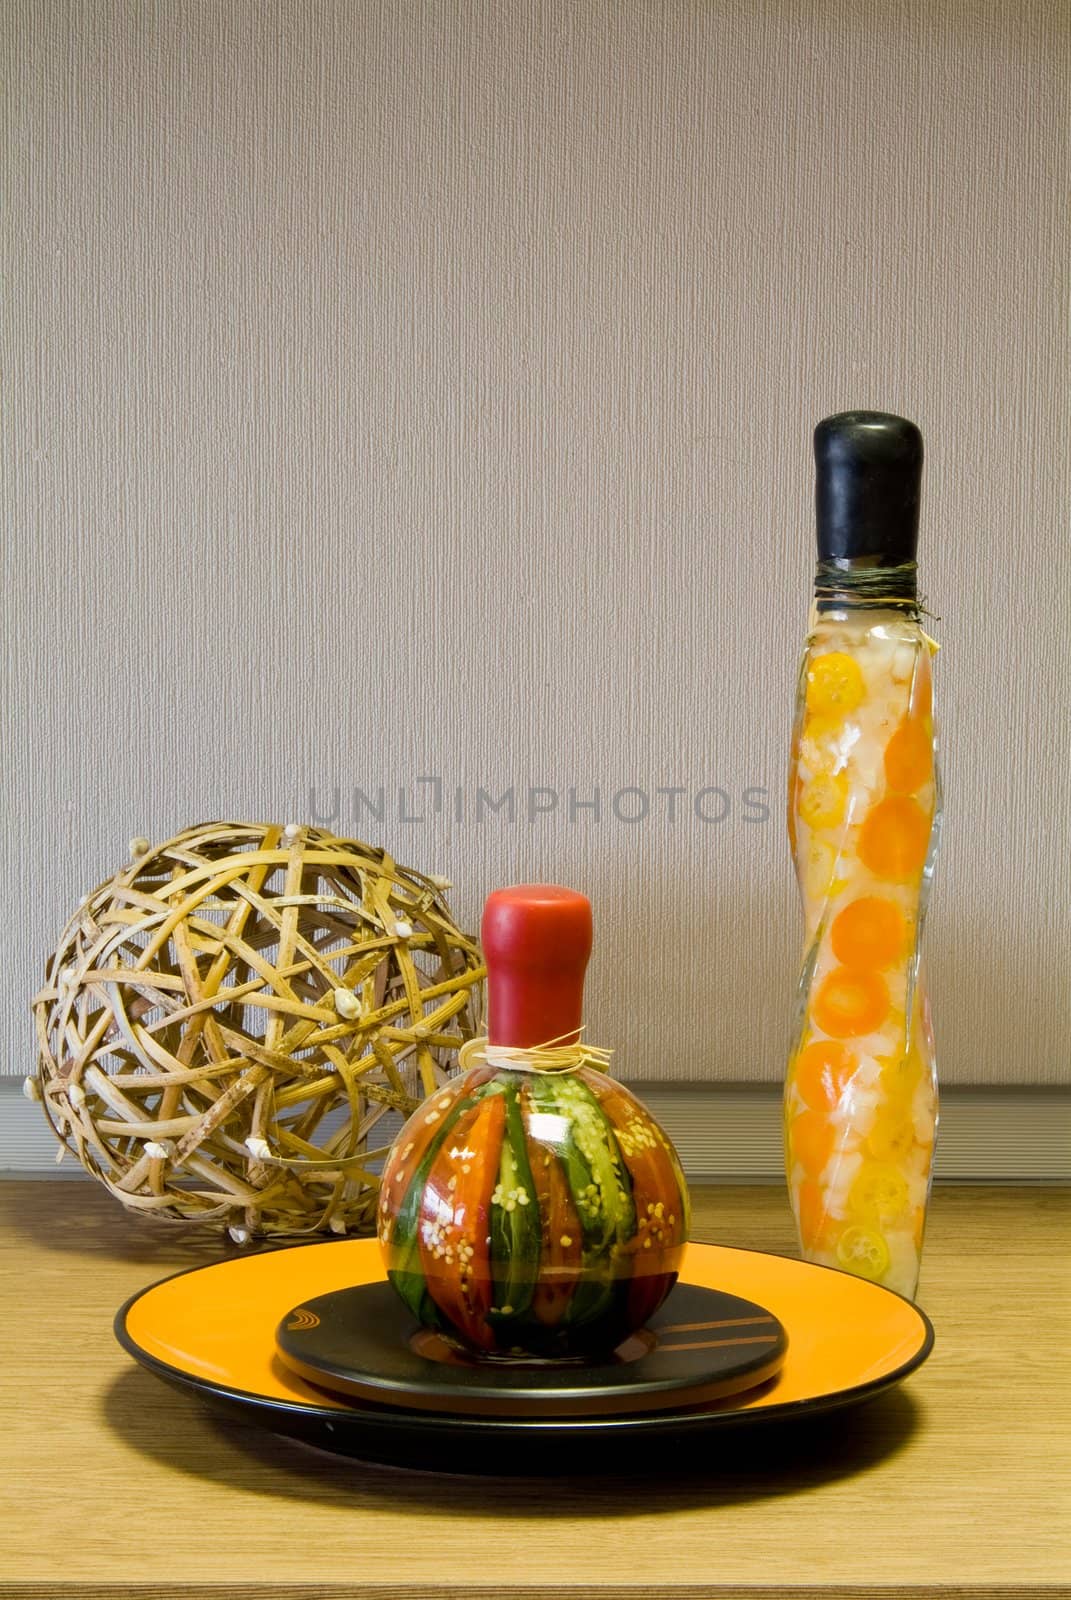 Decorative bottles, straw sphere and the ceramic plate on the table